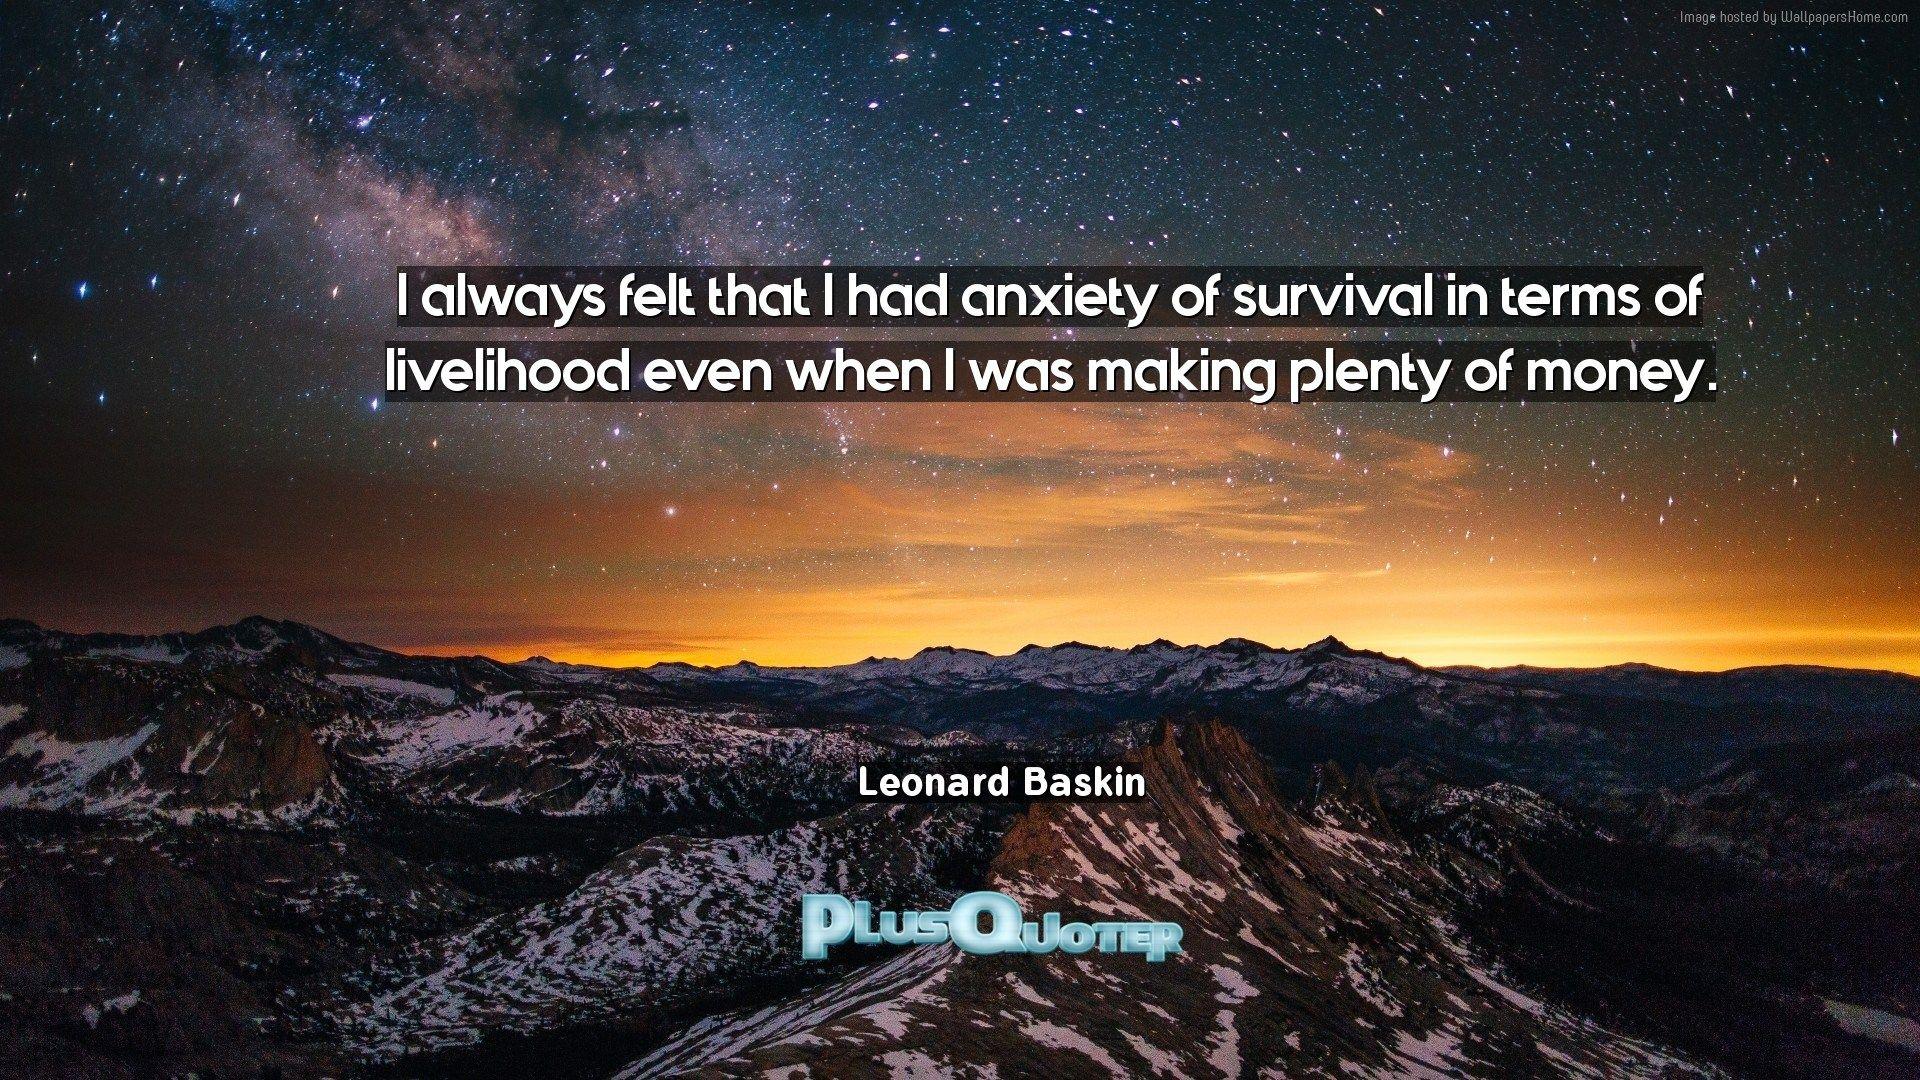 I always felt that I had anxiety of survival in terms